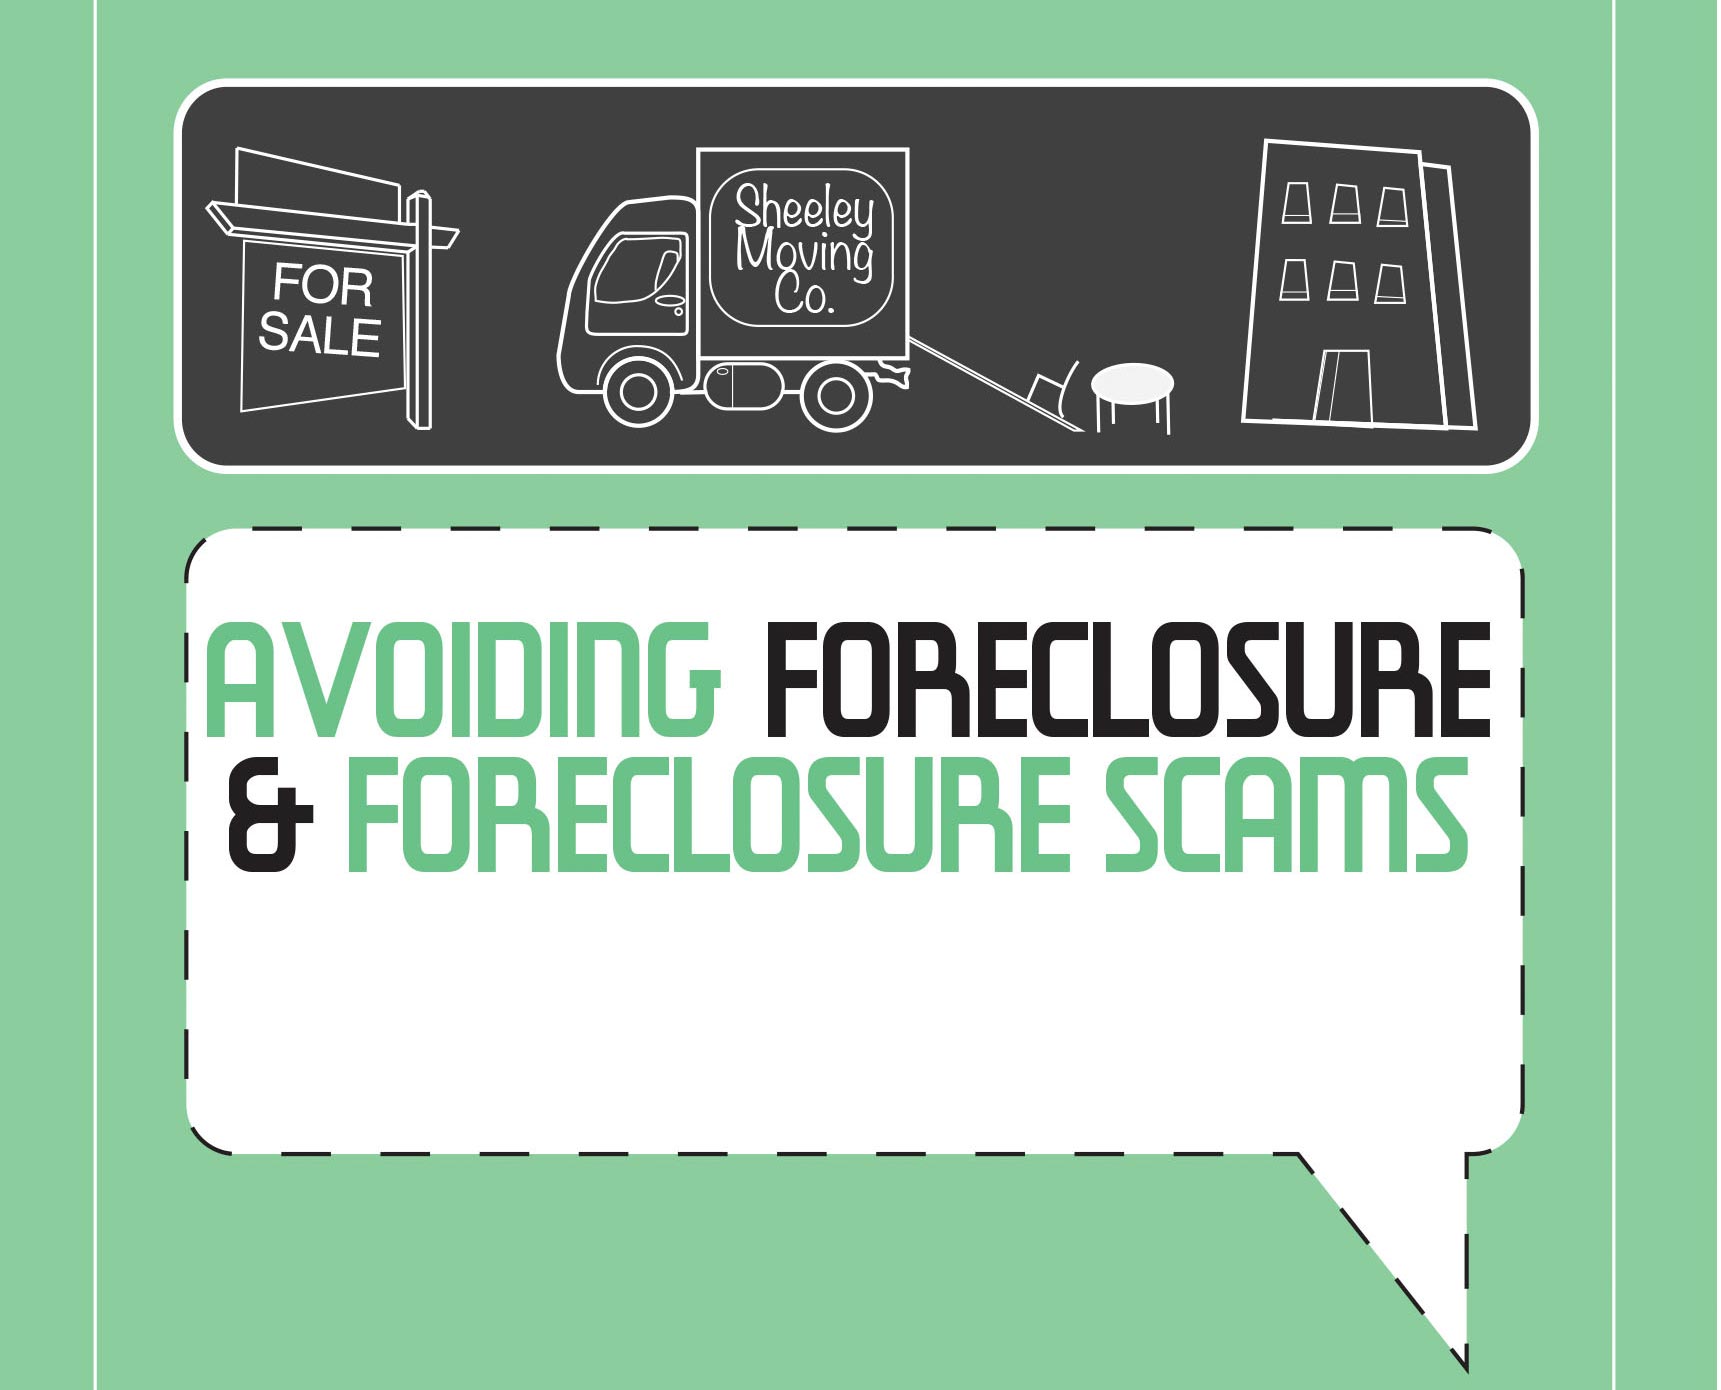 Avoiding-Foreclosure-and-Foreclosure-Scams-Booklet-1.jpg